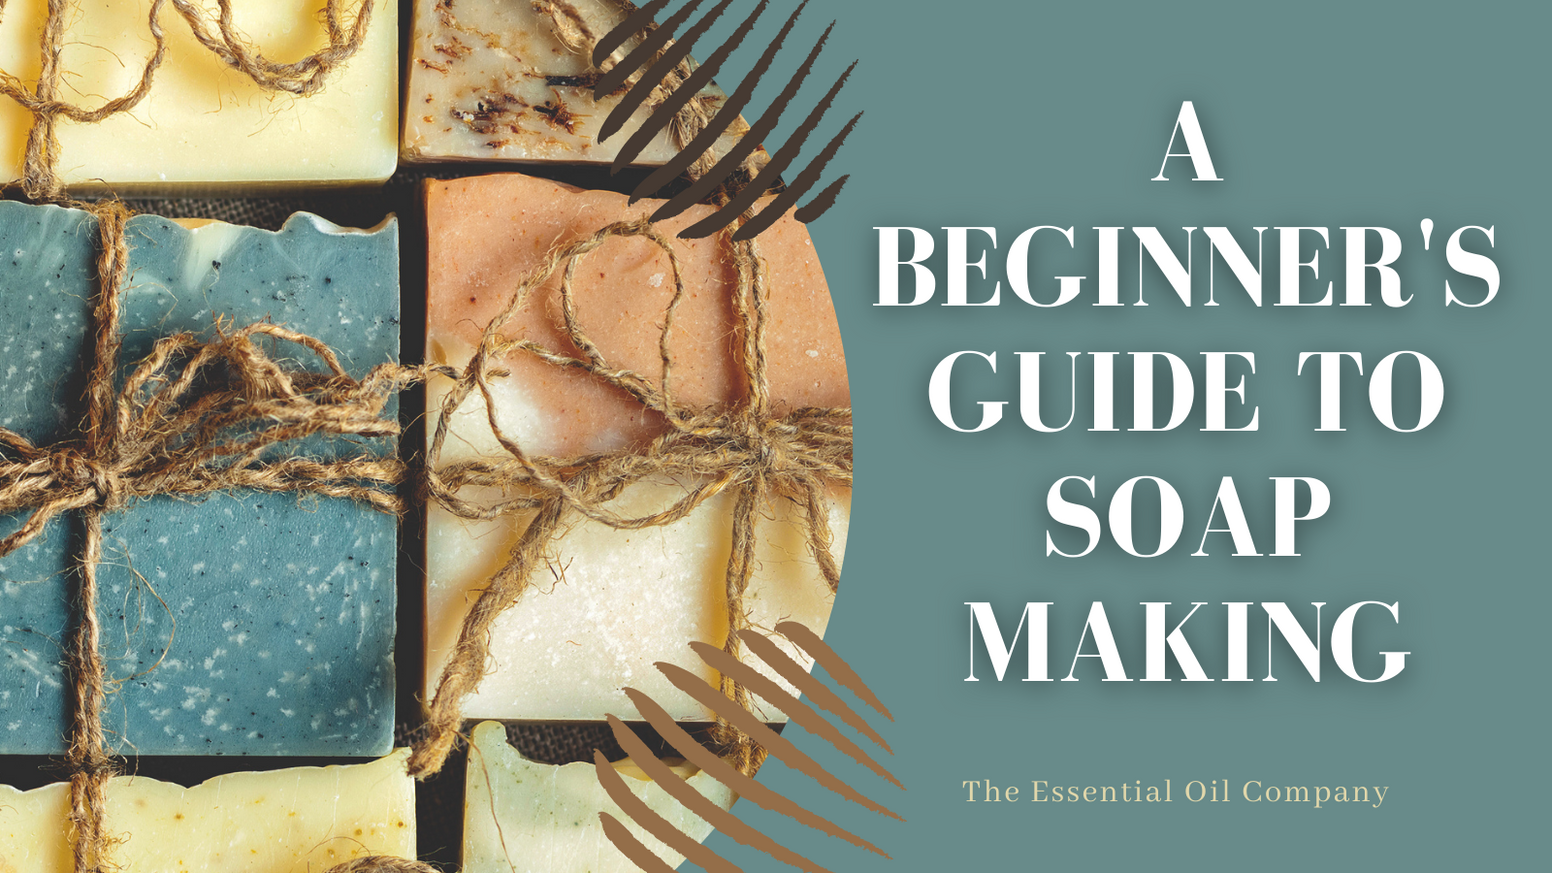 A Beginner's Guide to Soap Making